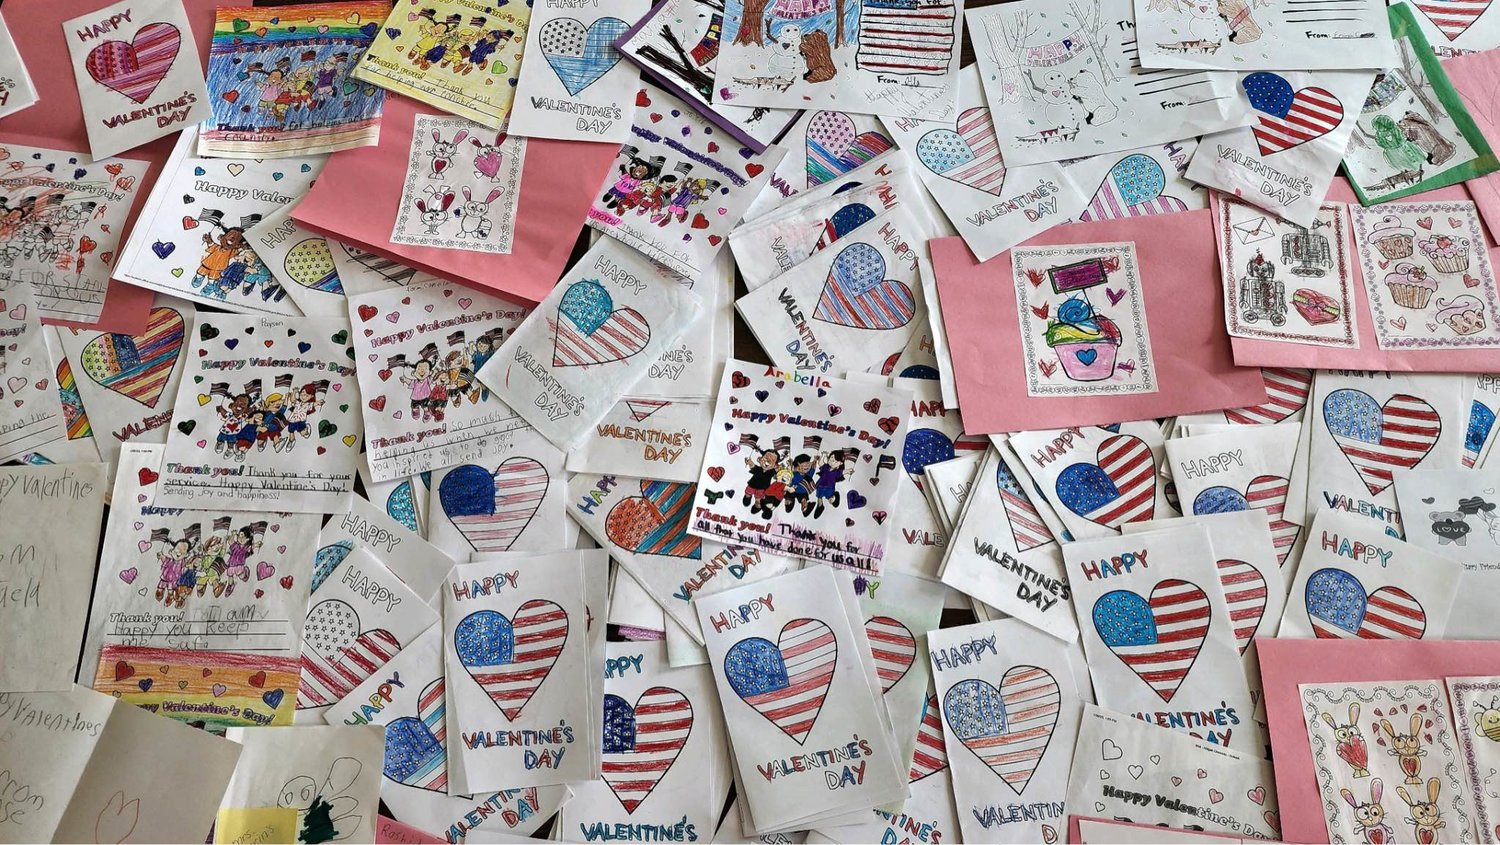 Some of the Valentine’s Day cards that were decorated by area school children are displayed before being sent to veterans in this photo from Assemblywoman Marianne Buttenschon’s office.